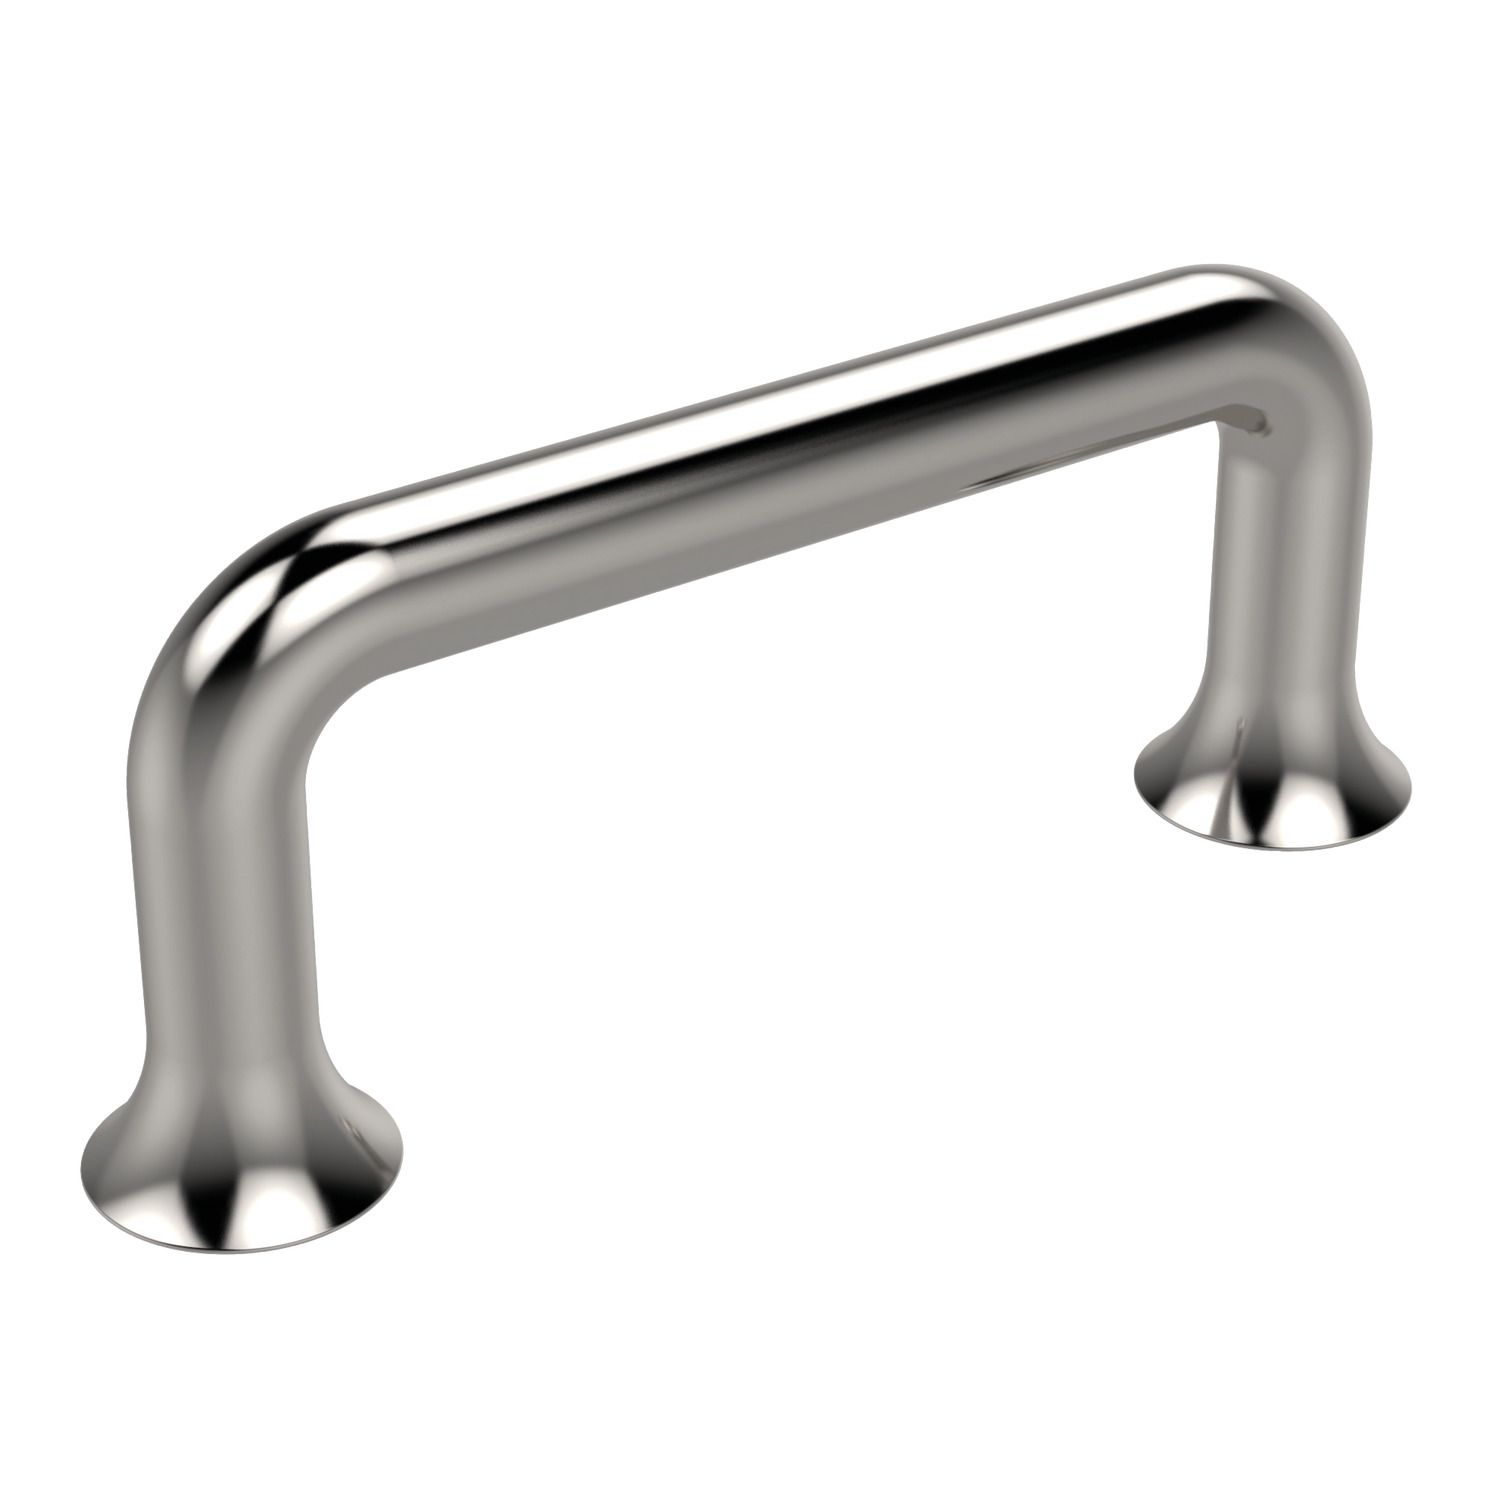 Product 79750, Pull Handles easy to clean, stainless steel / 